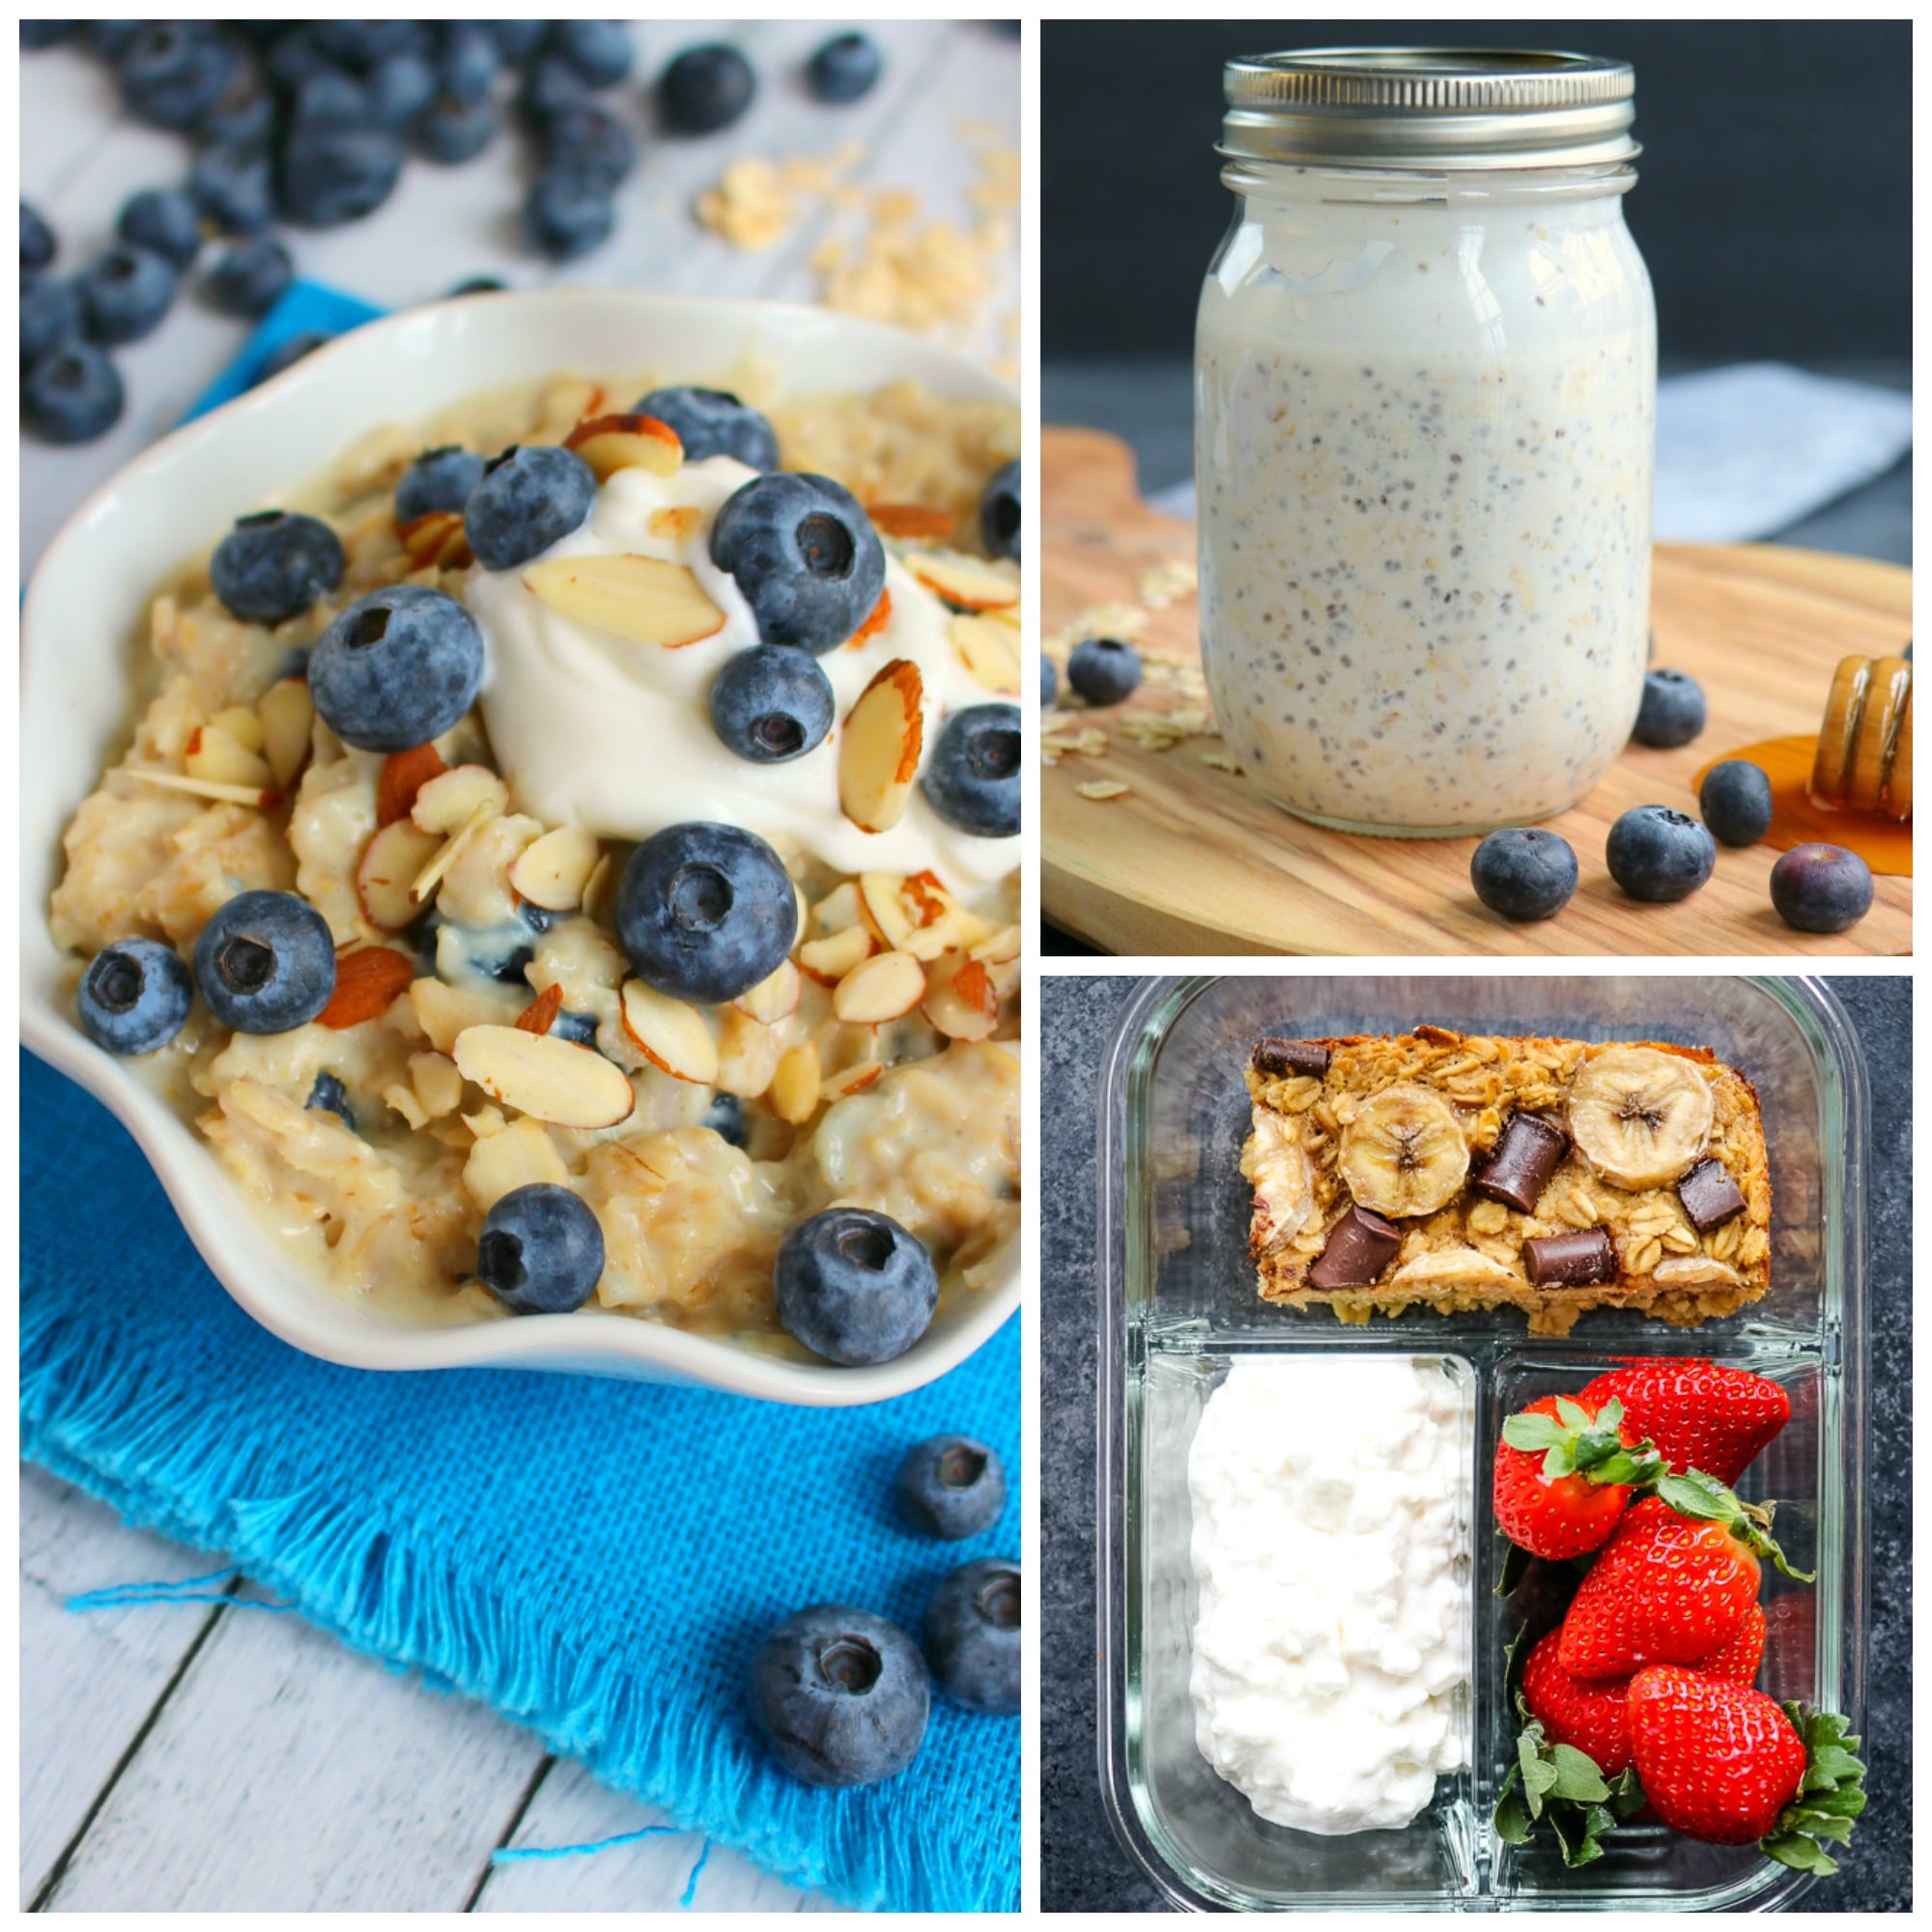 Are you looking for some good grab and go breakfast ideas for work to keep you away from the greasy, drive-thru breakfast? I've got ya covered with these 20 Healthy Breakfast Meal Prep Ideas for your busiest mornings!